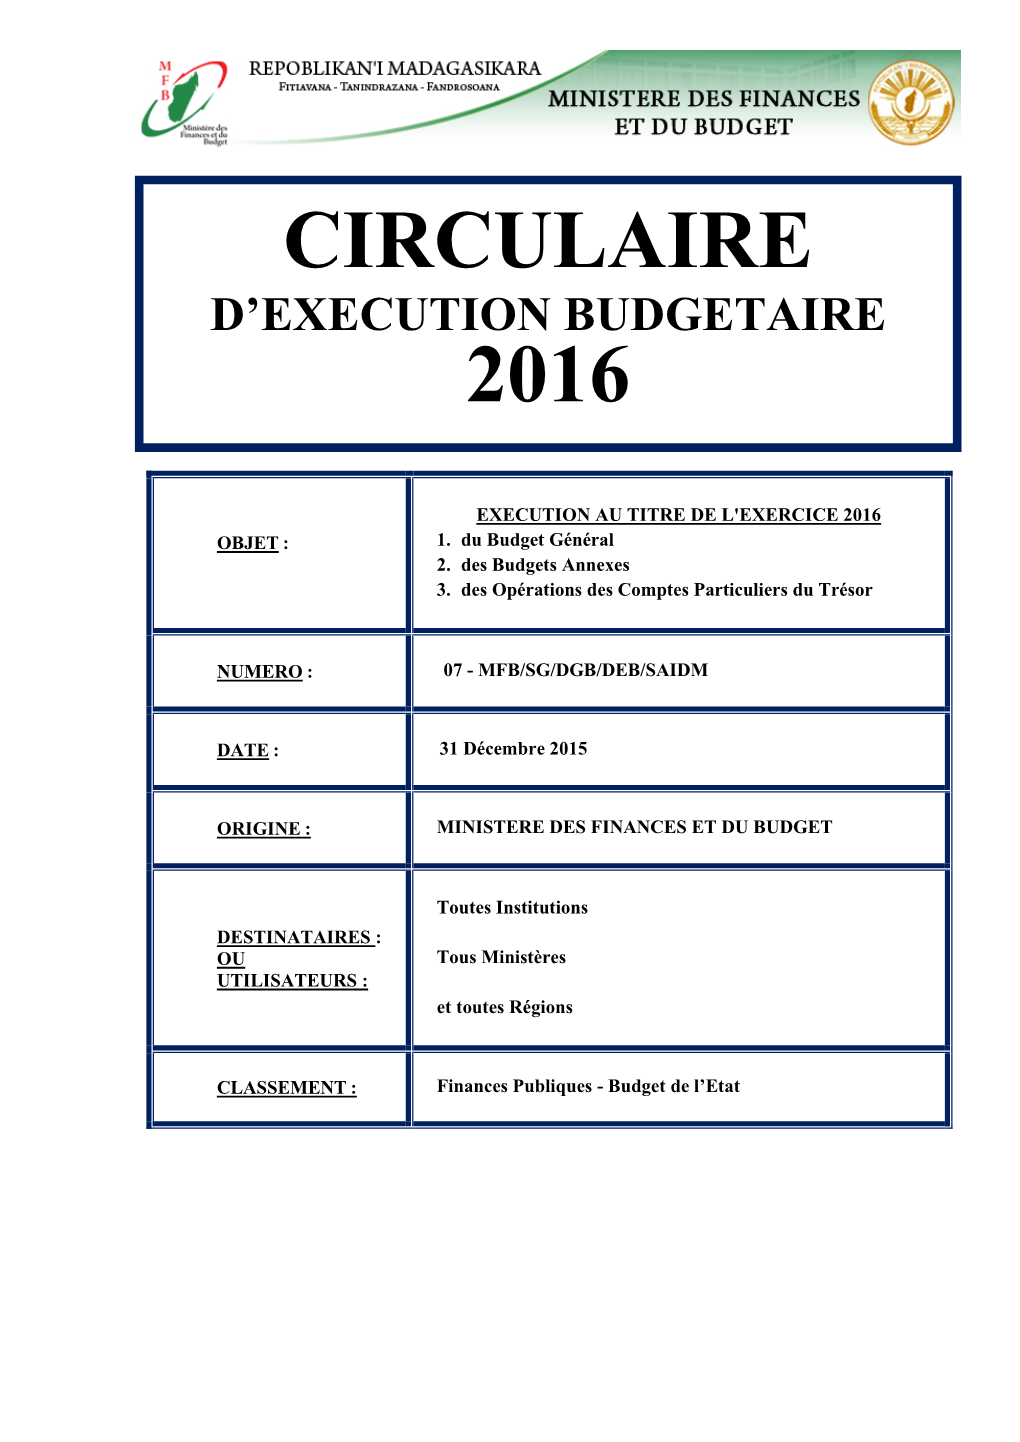 Circulaire D'execution Budgetaire 2016.Pdf